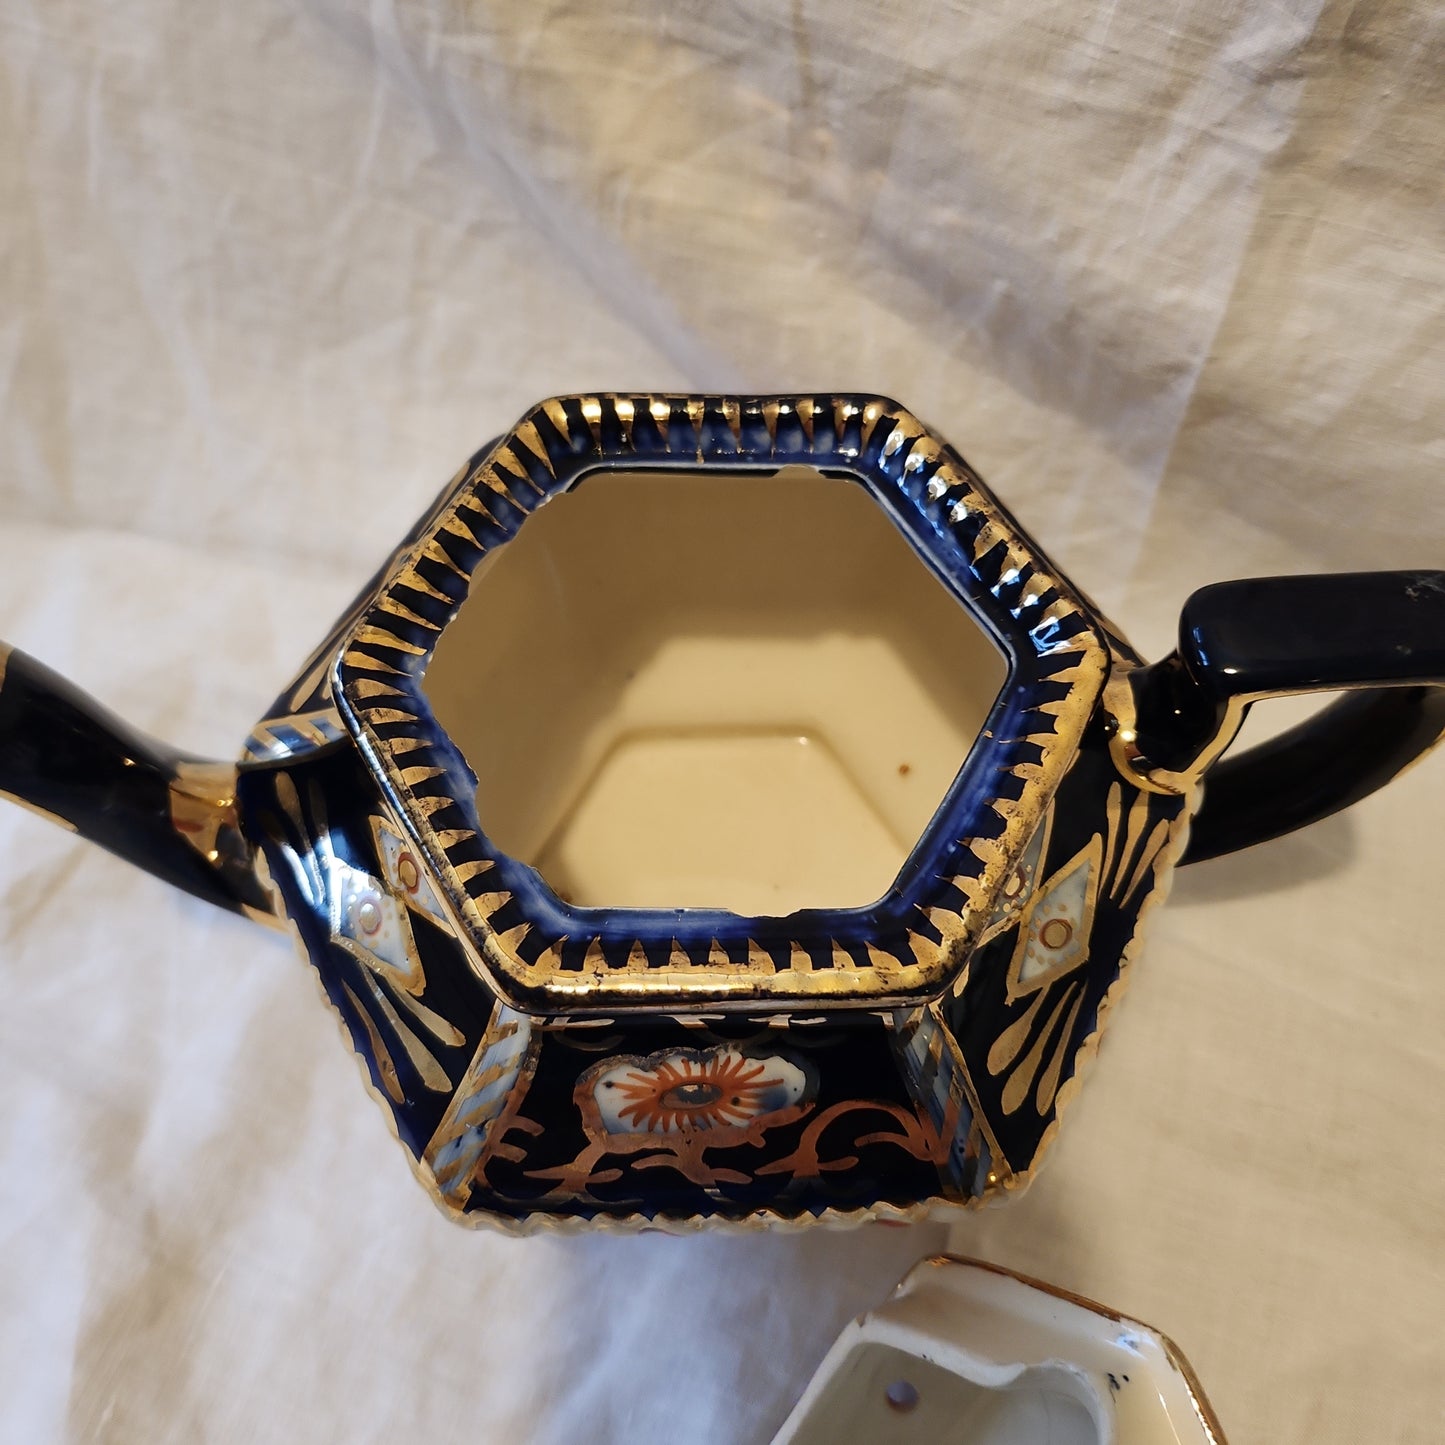 Antique Lingard Webster Imari Teapot of hexagonal form with damage. Early 20th century handpainted